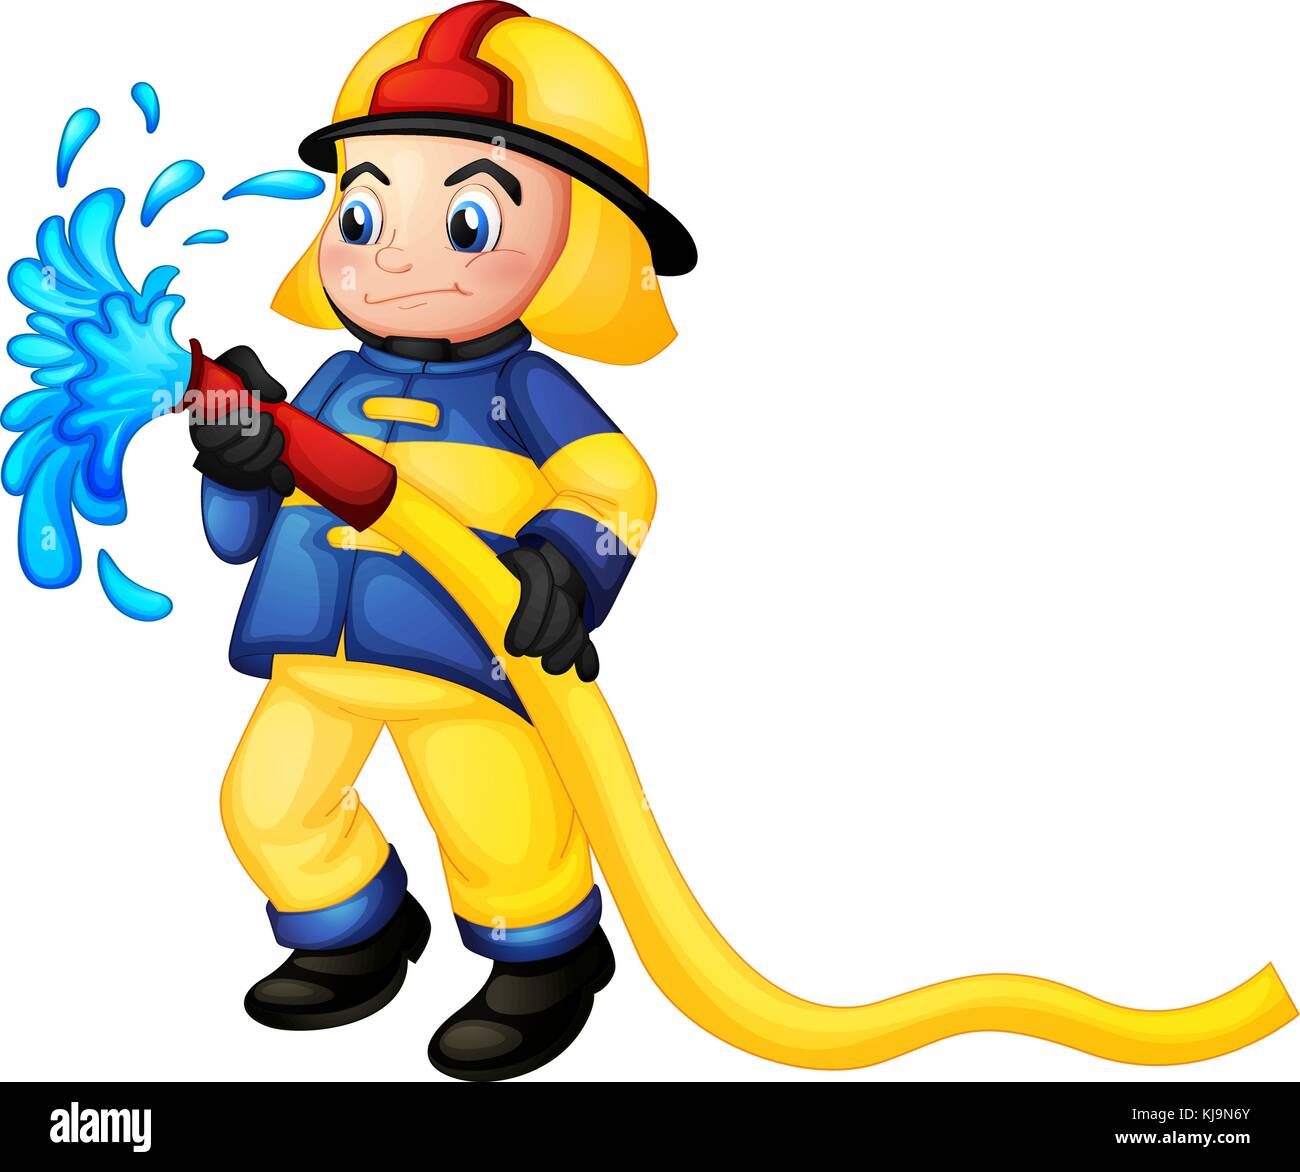 Illustration of a fireman holding a yellow water hose on a white background Stock Vector